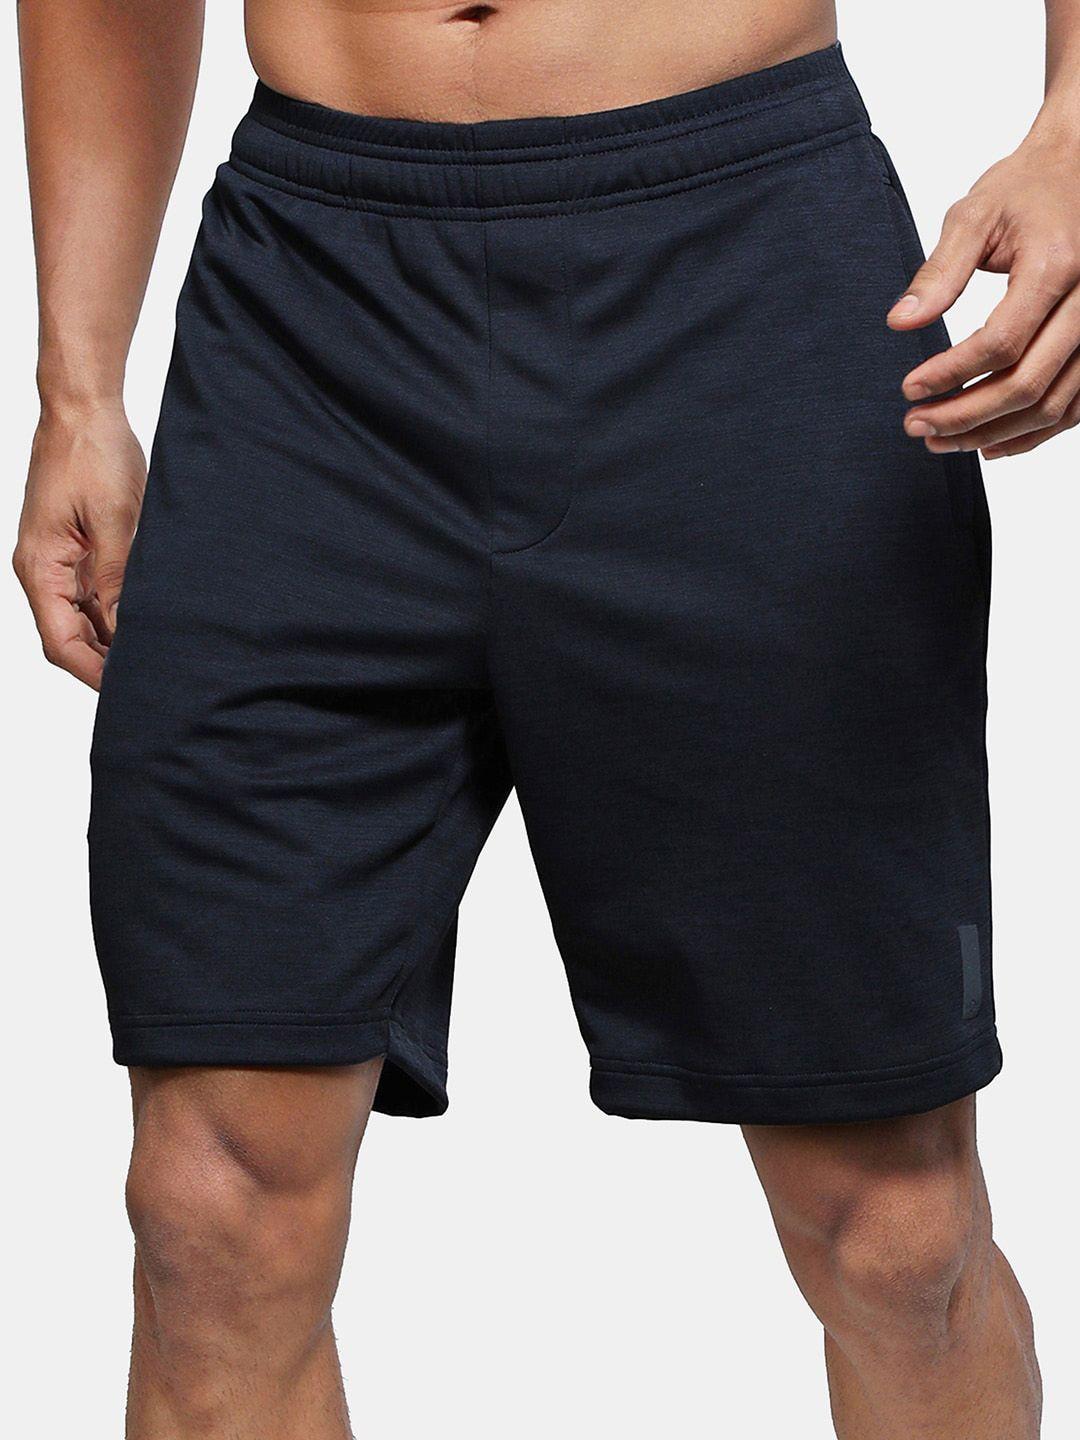 jockey men navy blue running sports shorts with antimicrobial technology